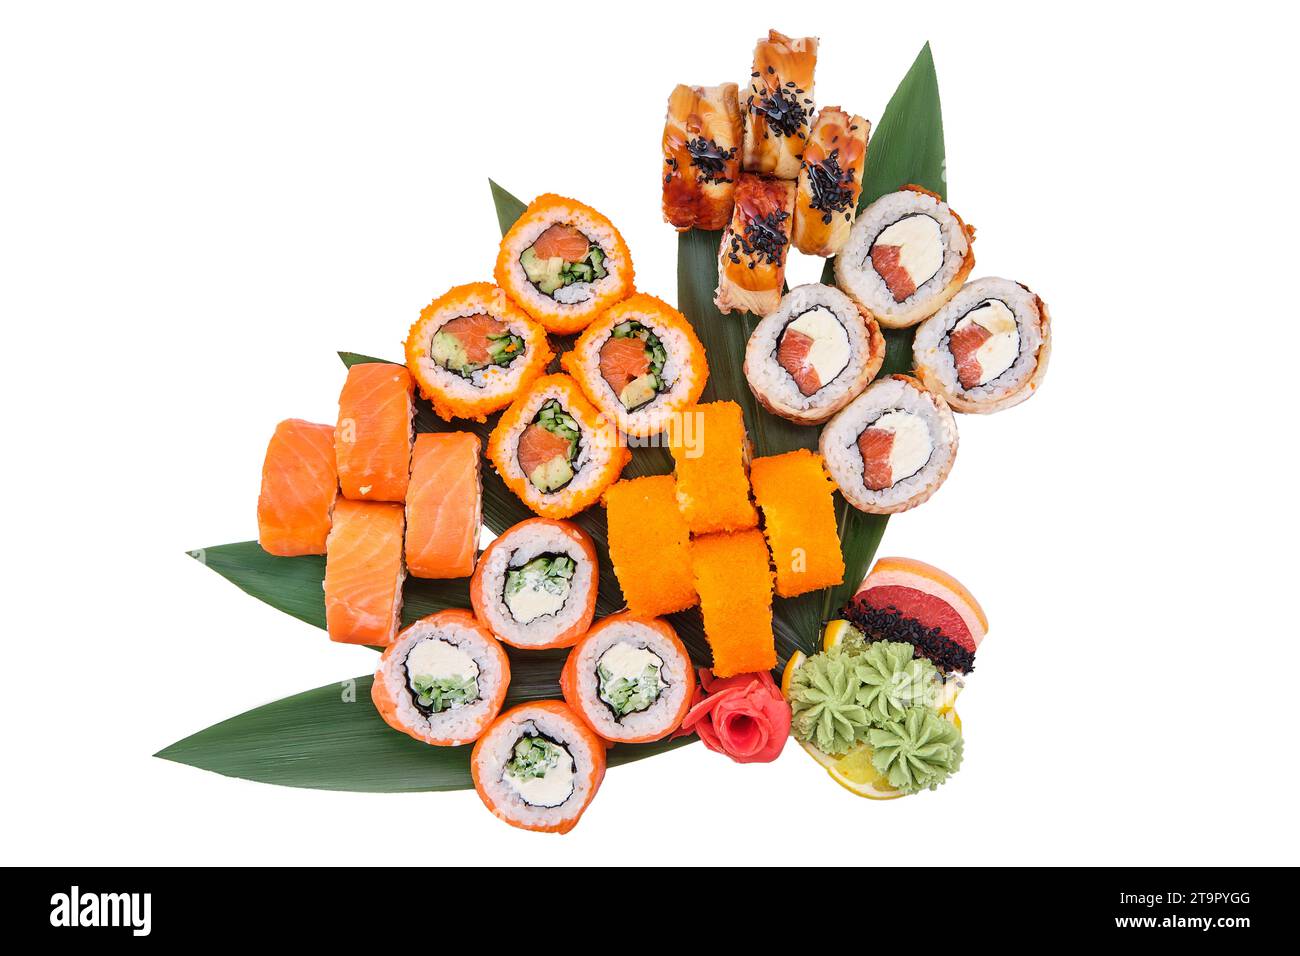 Overhead view of big set of sushi rolls served on bamboo leaves Stock Photo